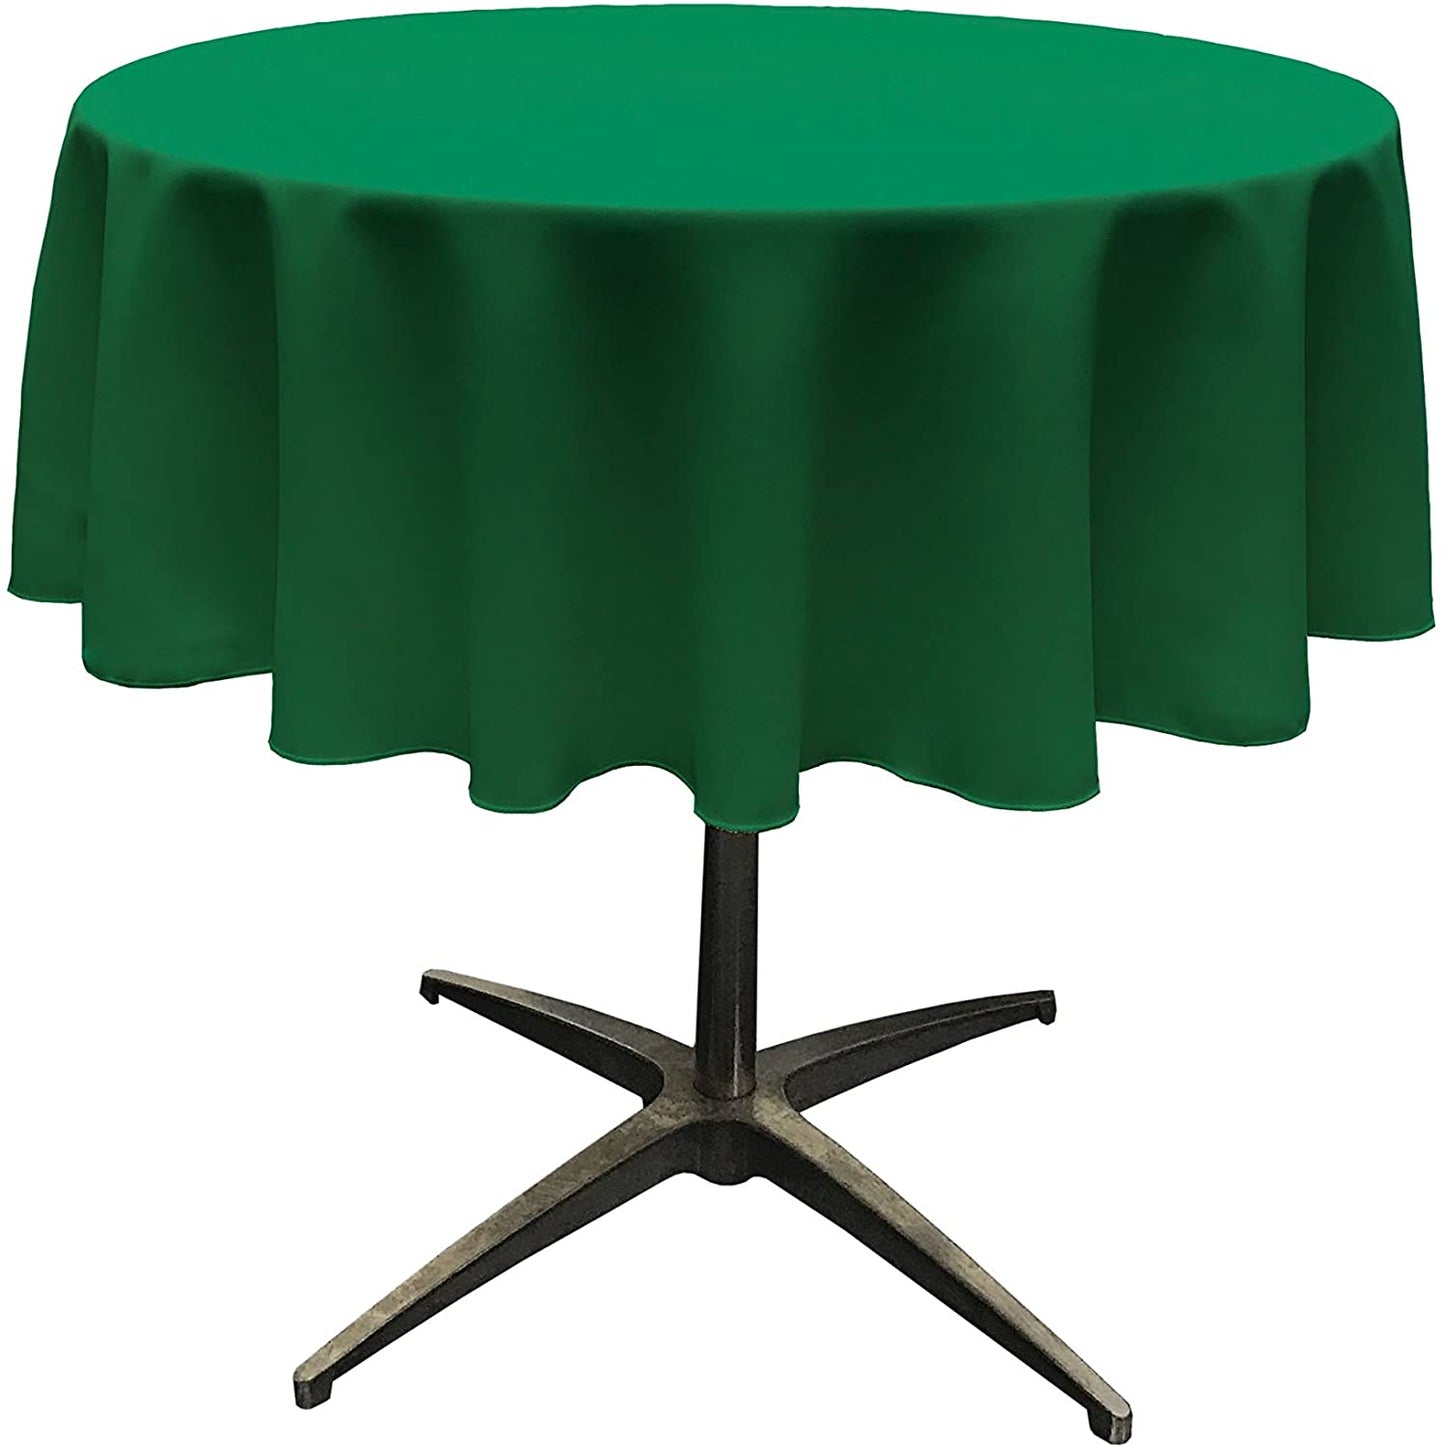 Polyester Poplin Washable Round Tablecloth, Stain and Wrinkle Resistant Table Cover Emerald Green